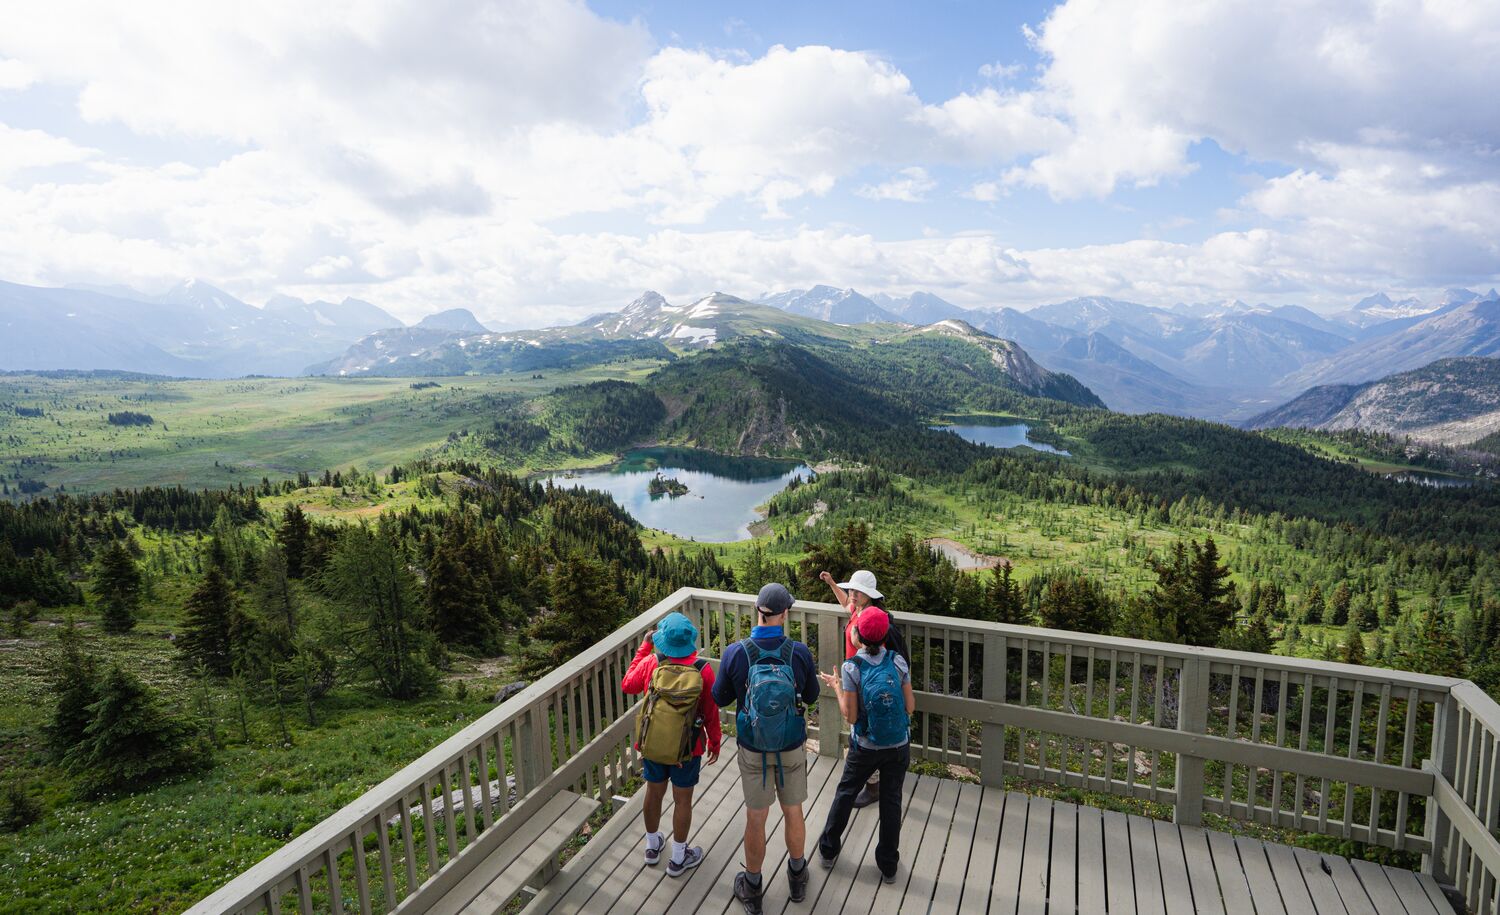 Four people on the Standish Viewing Deck at sunshine Meadows overlooking Rockbound Lake near Banff National Park.